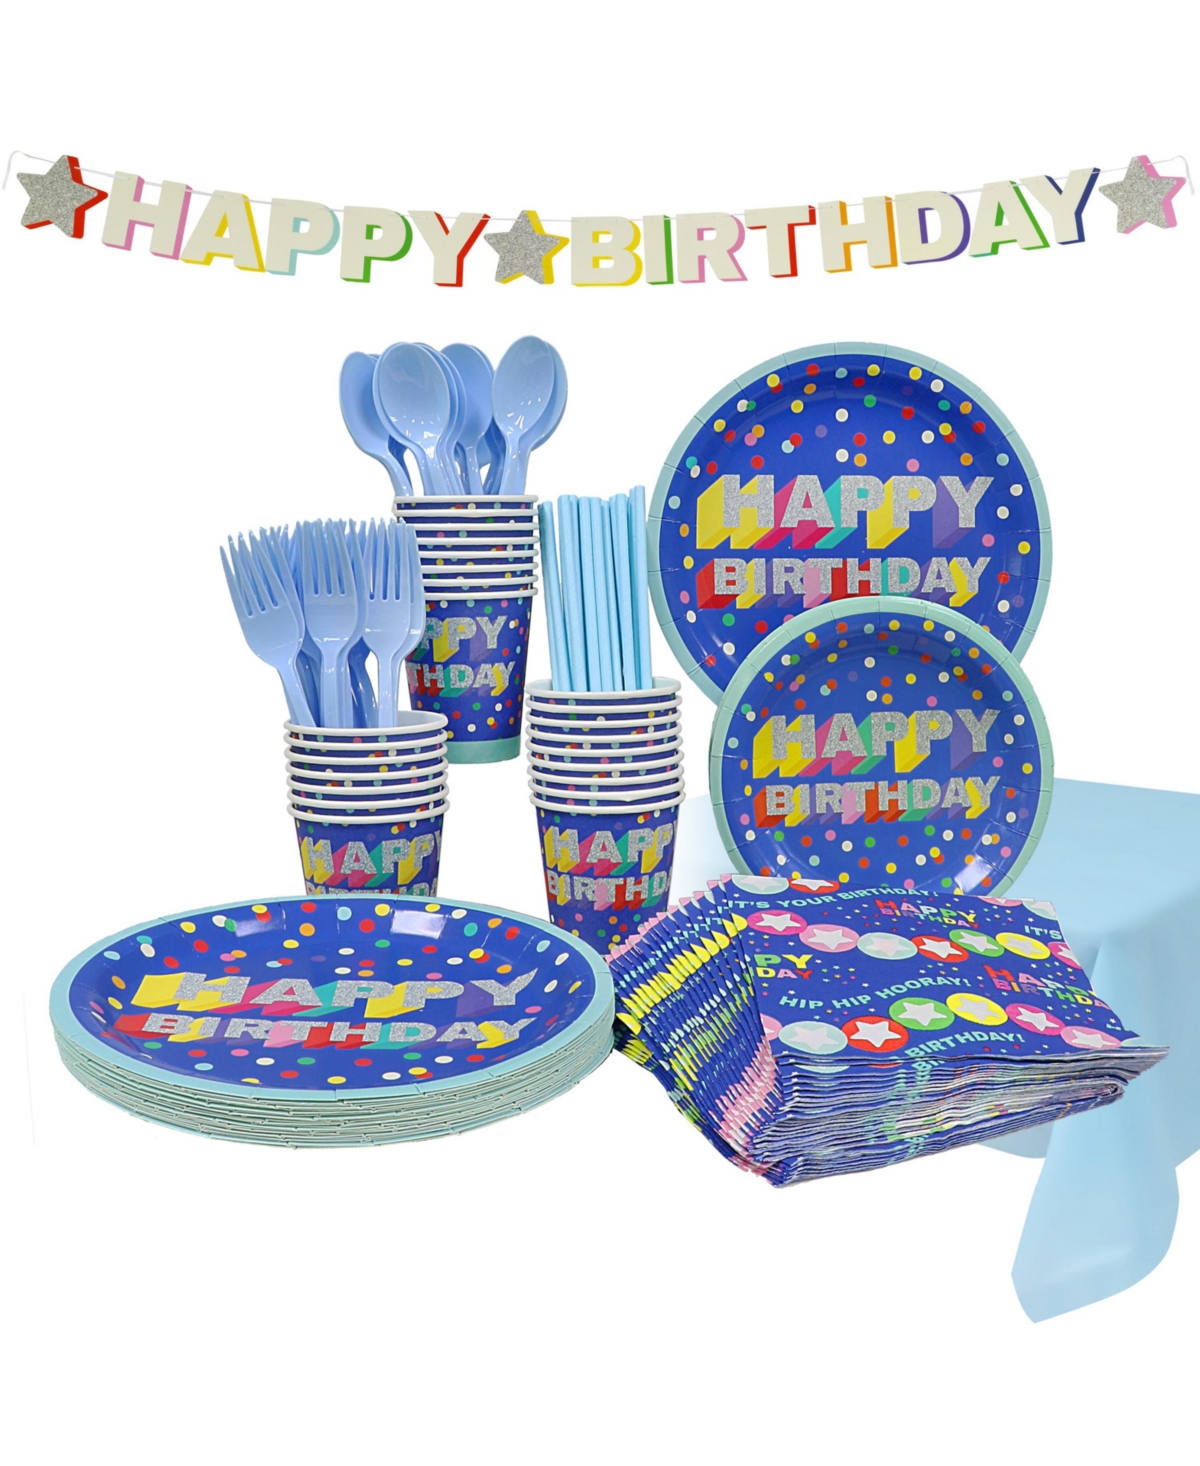 Puleo Disposable Birthday Party Set, Serves 24, With Large And Small Paper Plates, Paper Cups, Straws, Nap In Blue